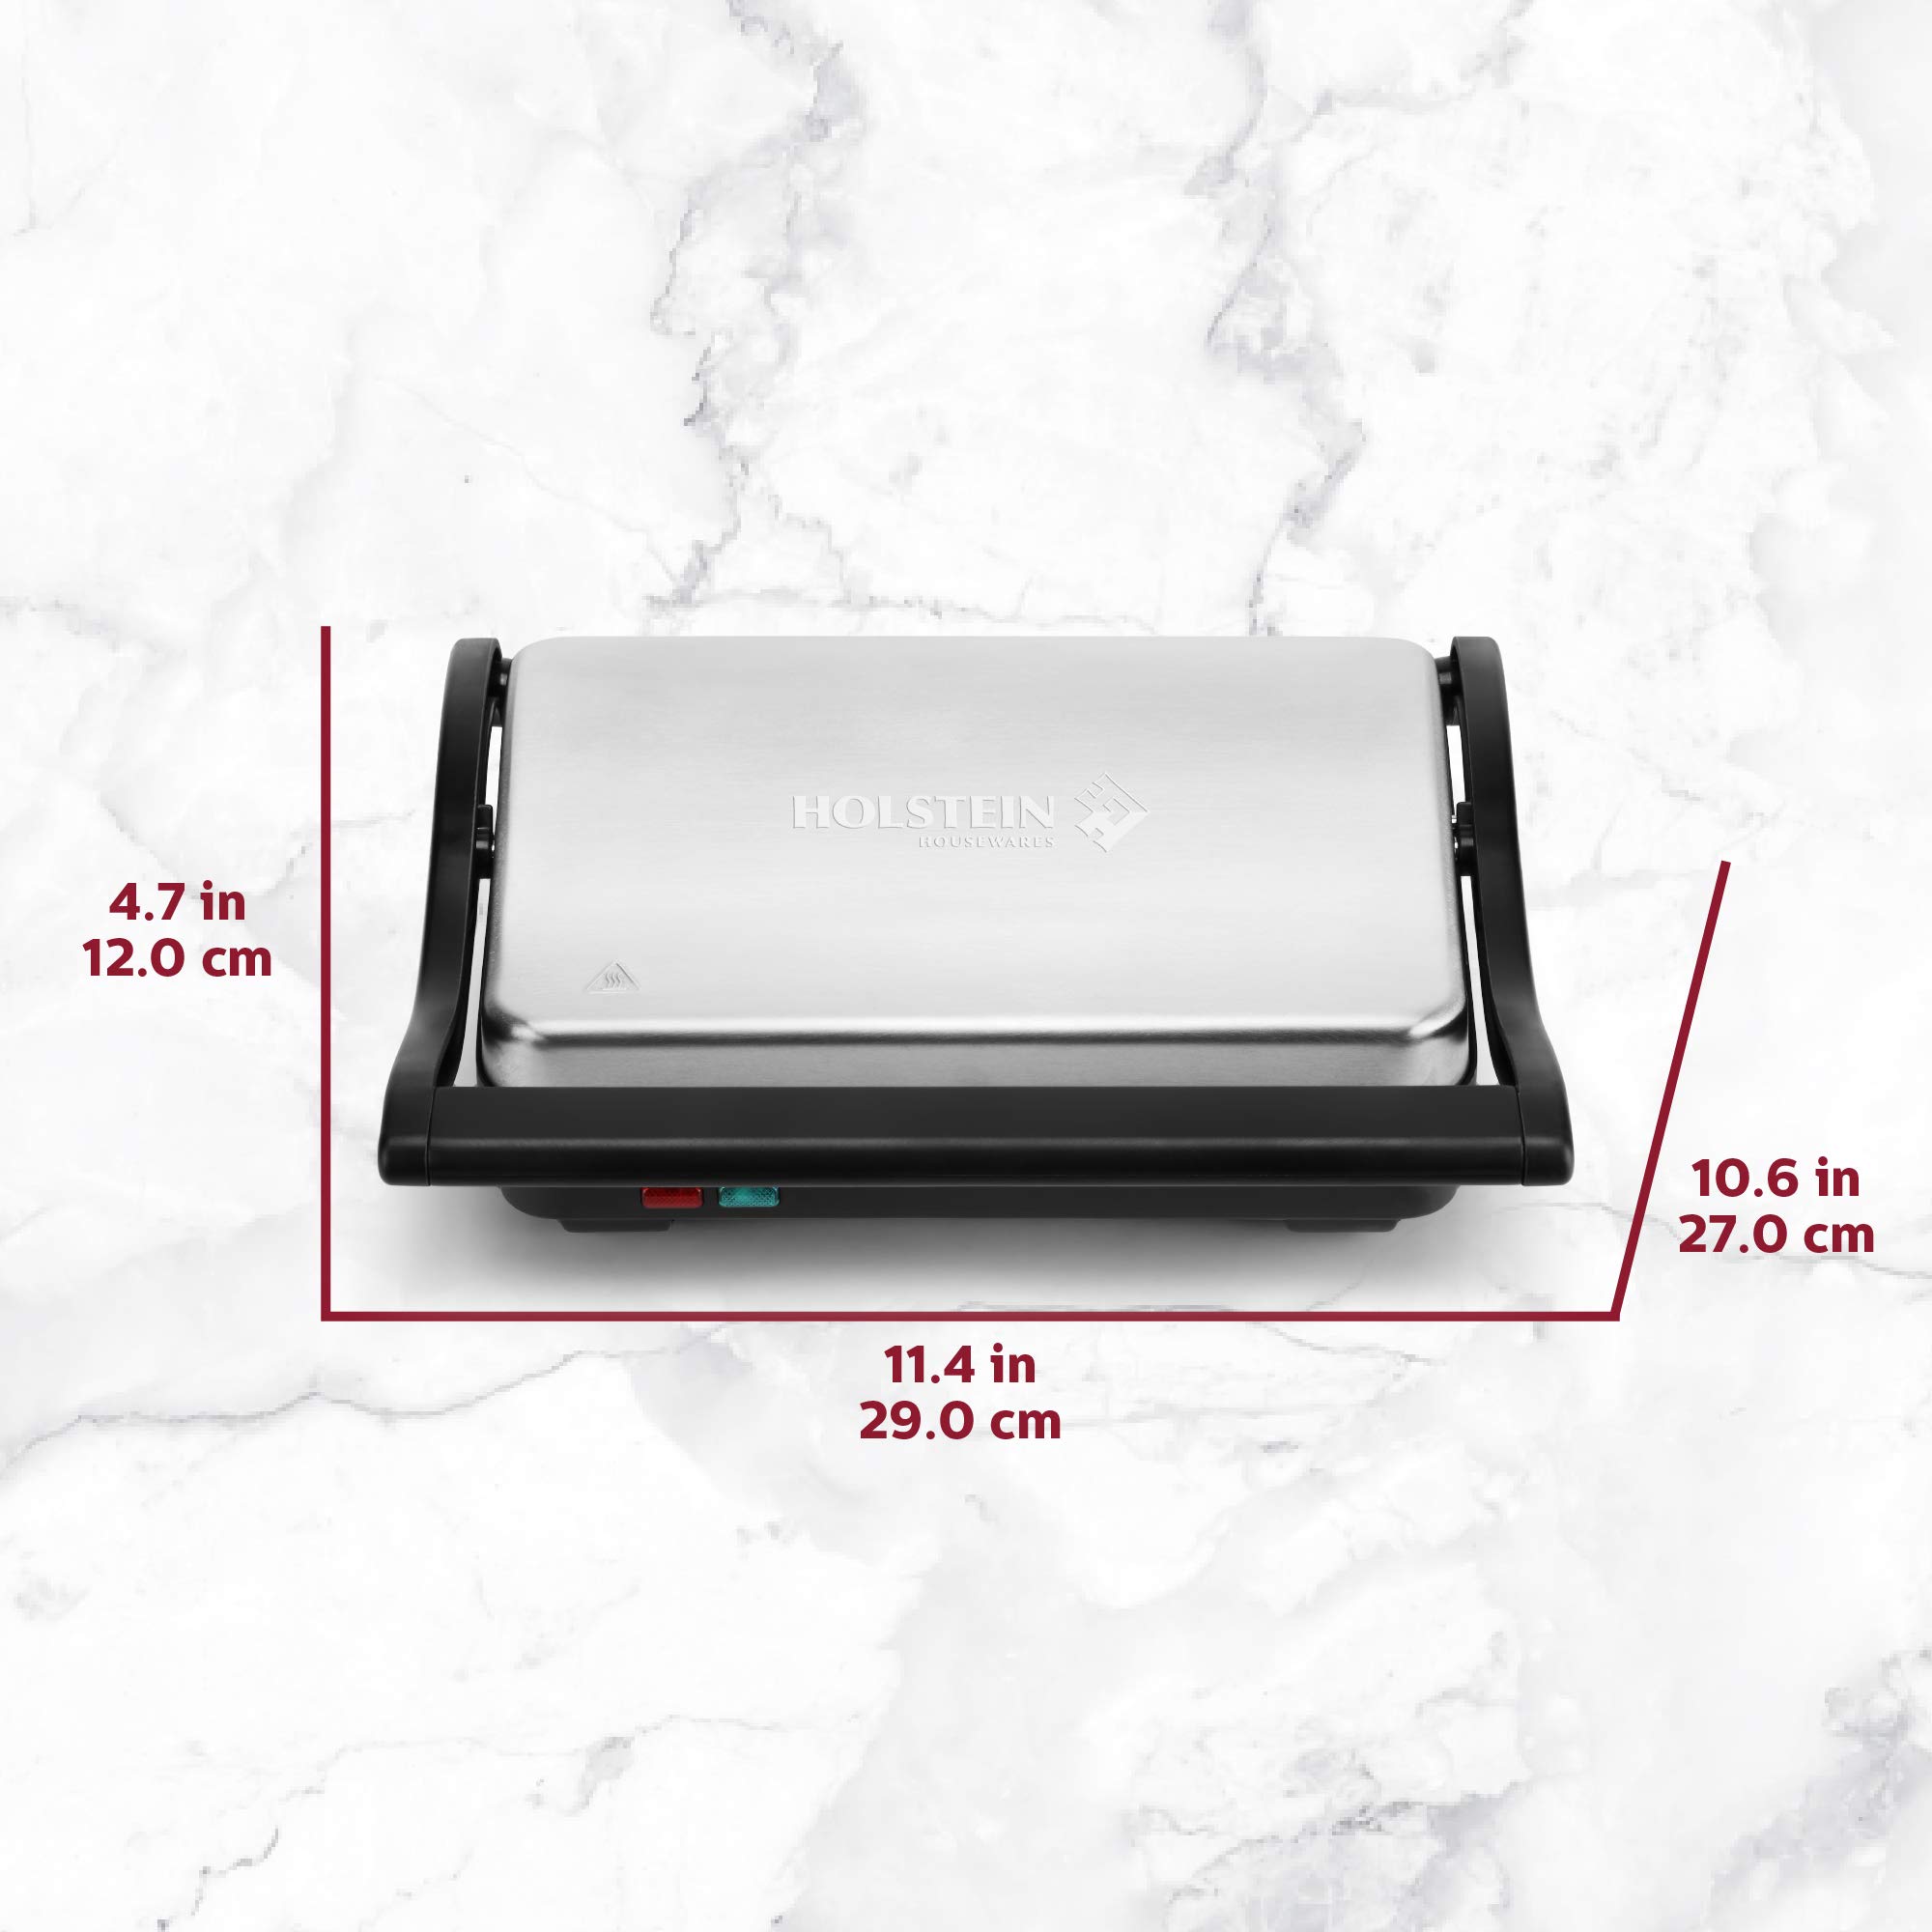 Holstein Housewares Electric Griddle for Toasting Sandwiches, Various Snacks - Black/Stainless Steel